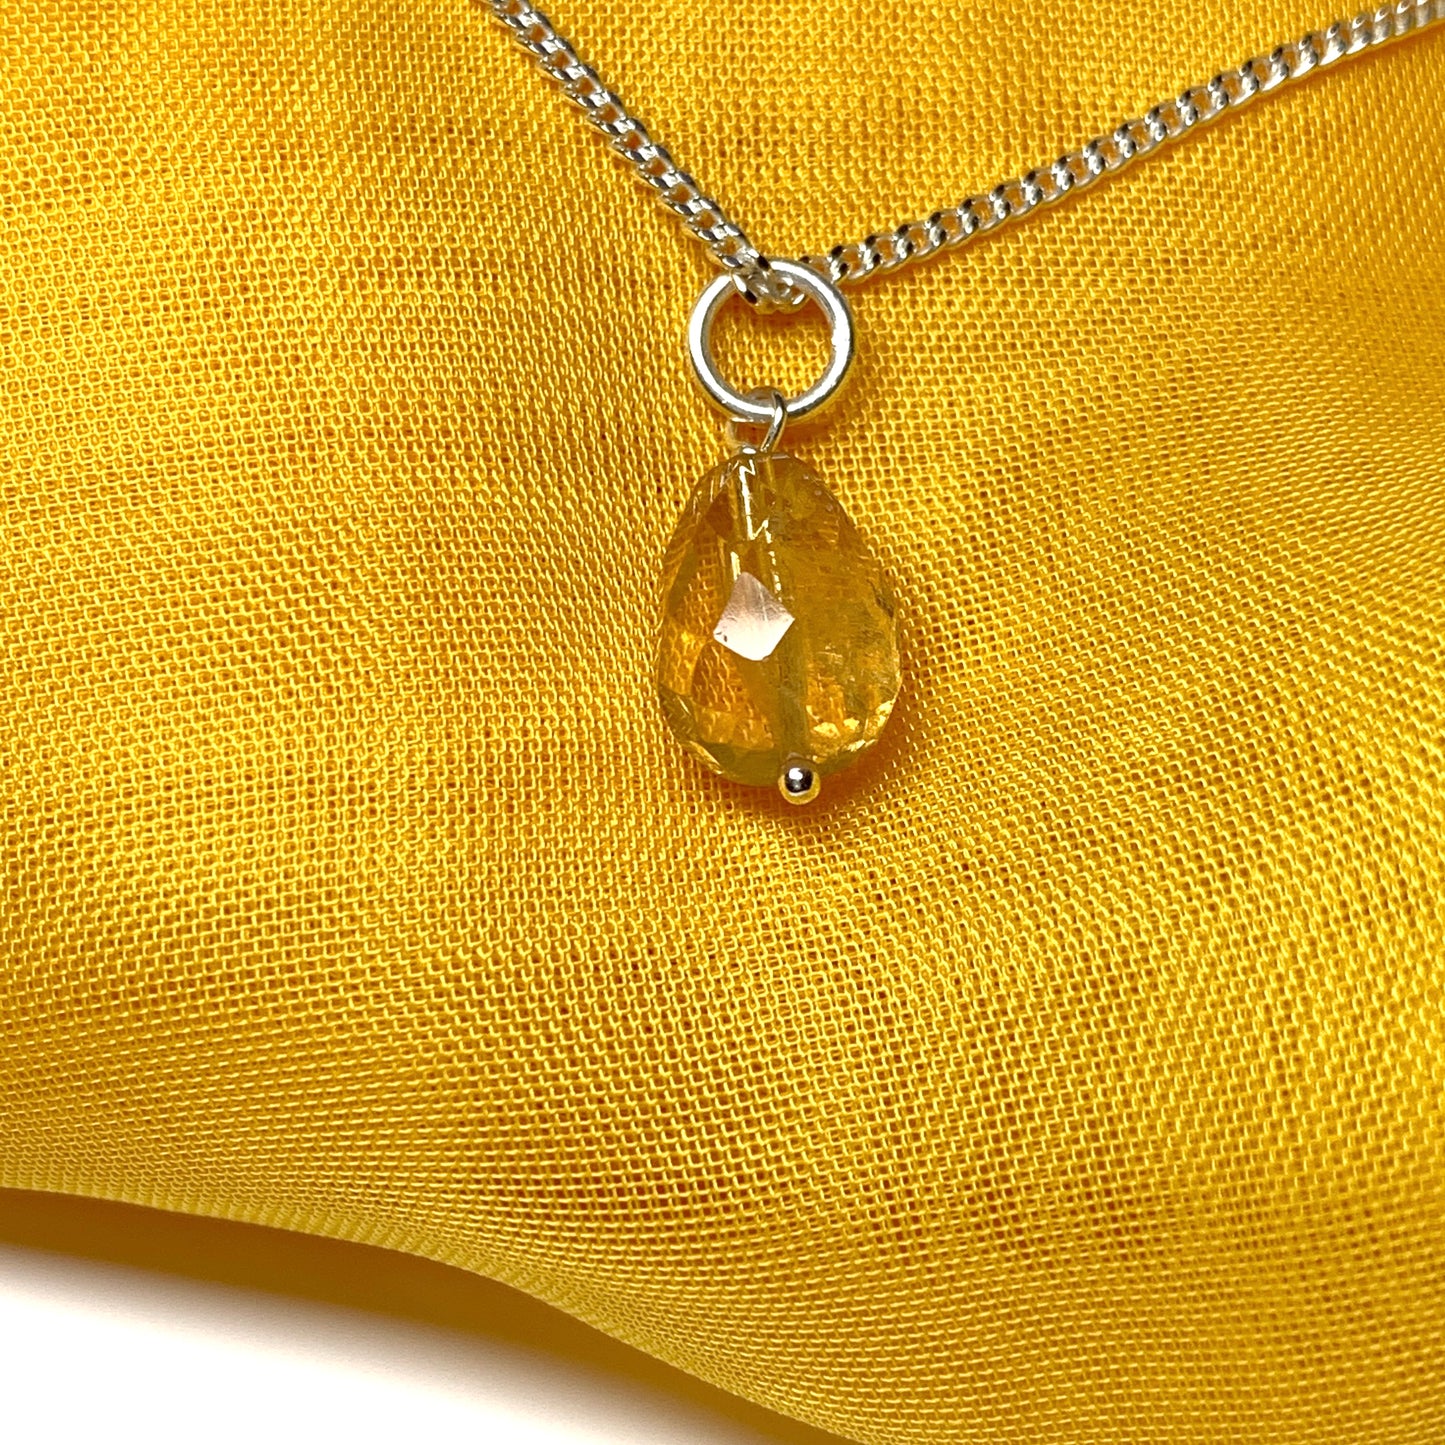 Small Tear Drop Silver Pear Shaped Citrine Necklace Pendent